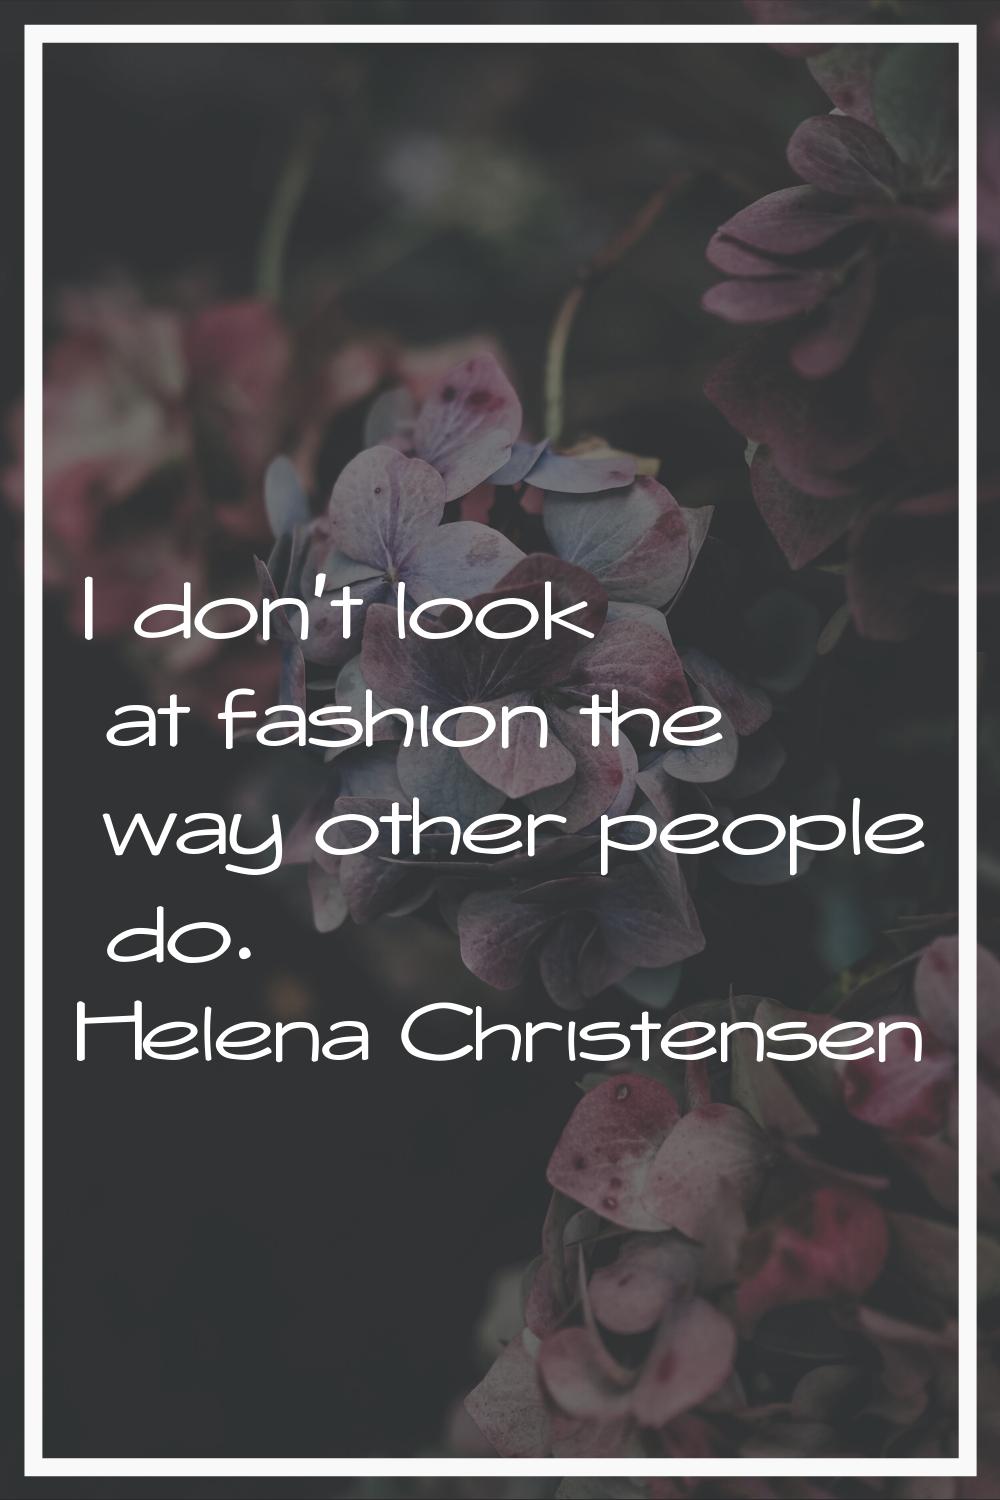 I don't look at fashion the way other people do.